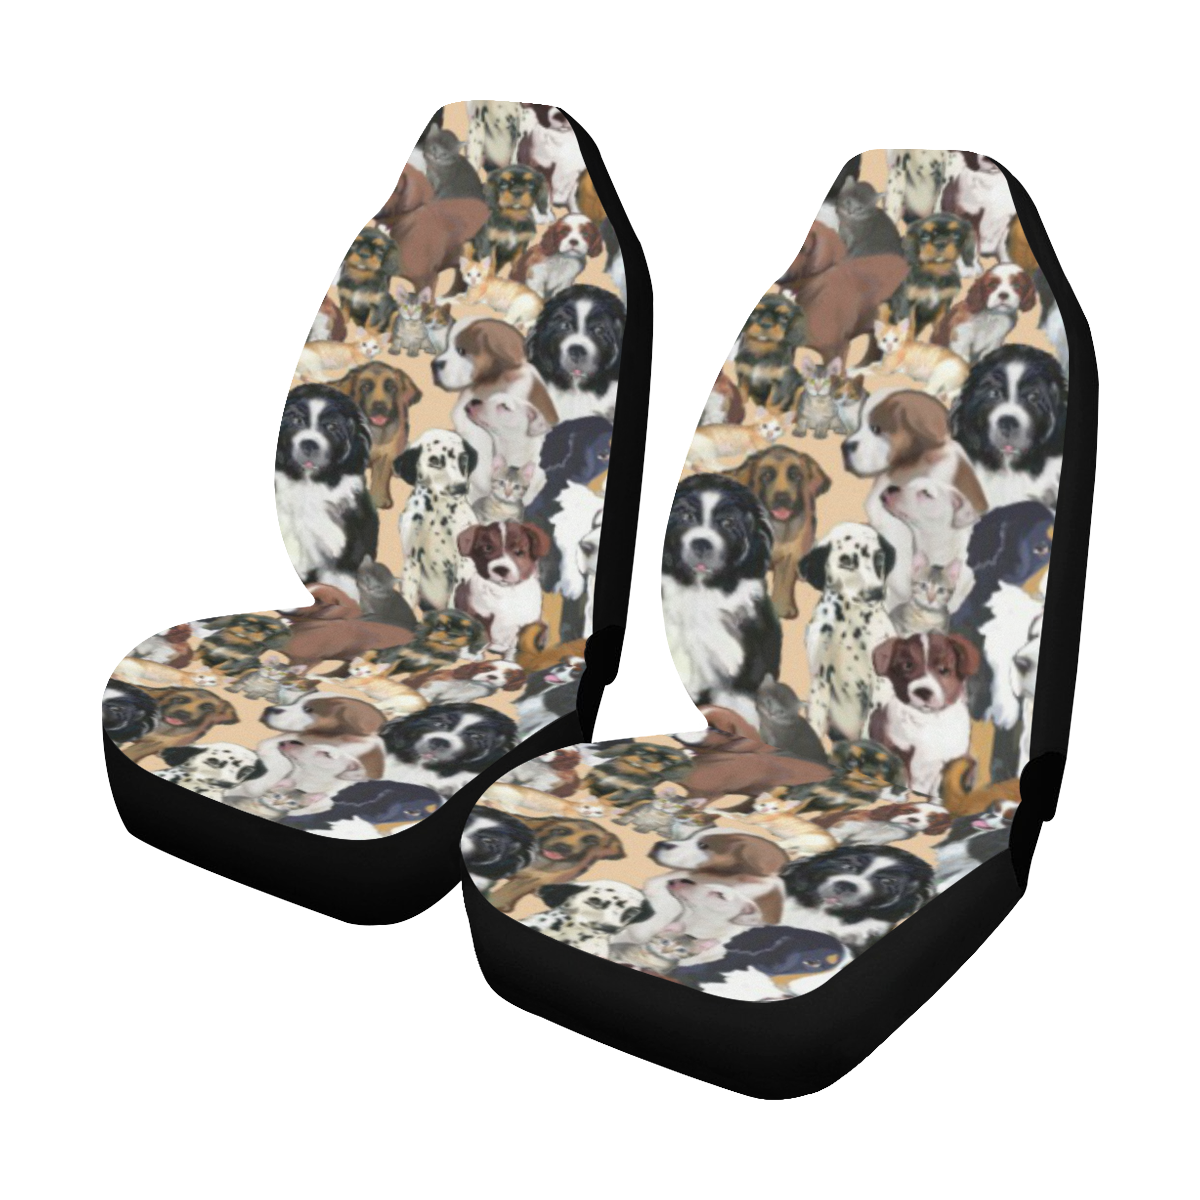 puppies and kittens car seat covers Car Seat Covers (Set of 2)